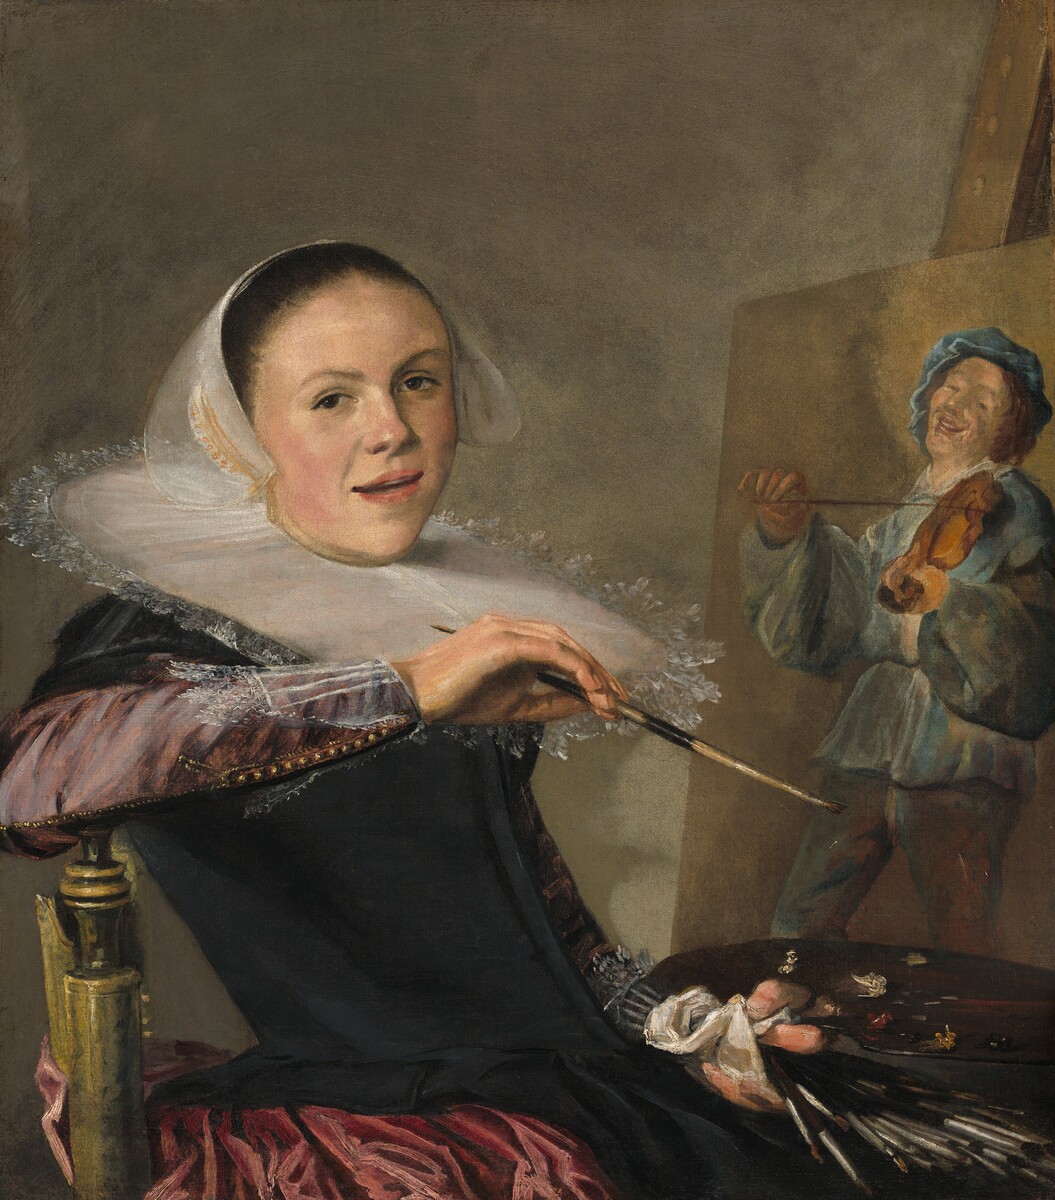 Most creative use of a bike helmet goes to Kelly and Mignon for their version of another subject of one of our tours—Judith Leyster’s “Self-Portrait” (c. 1630).